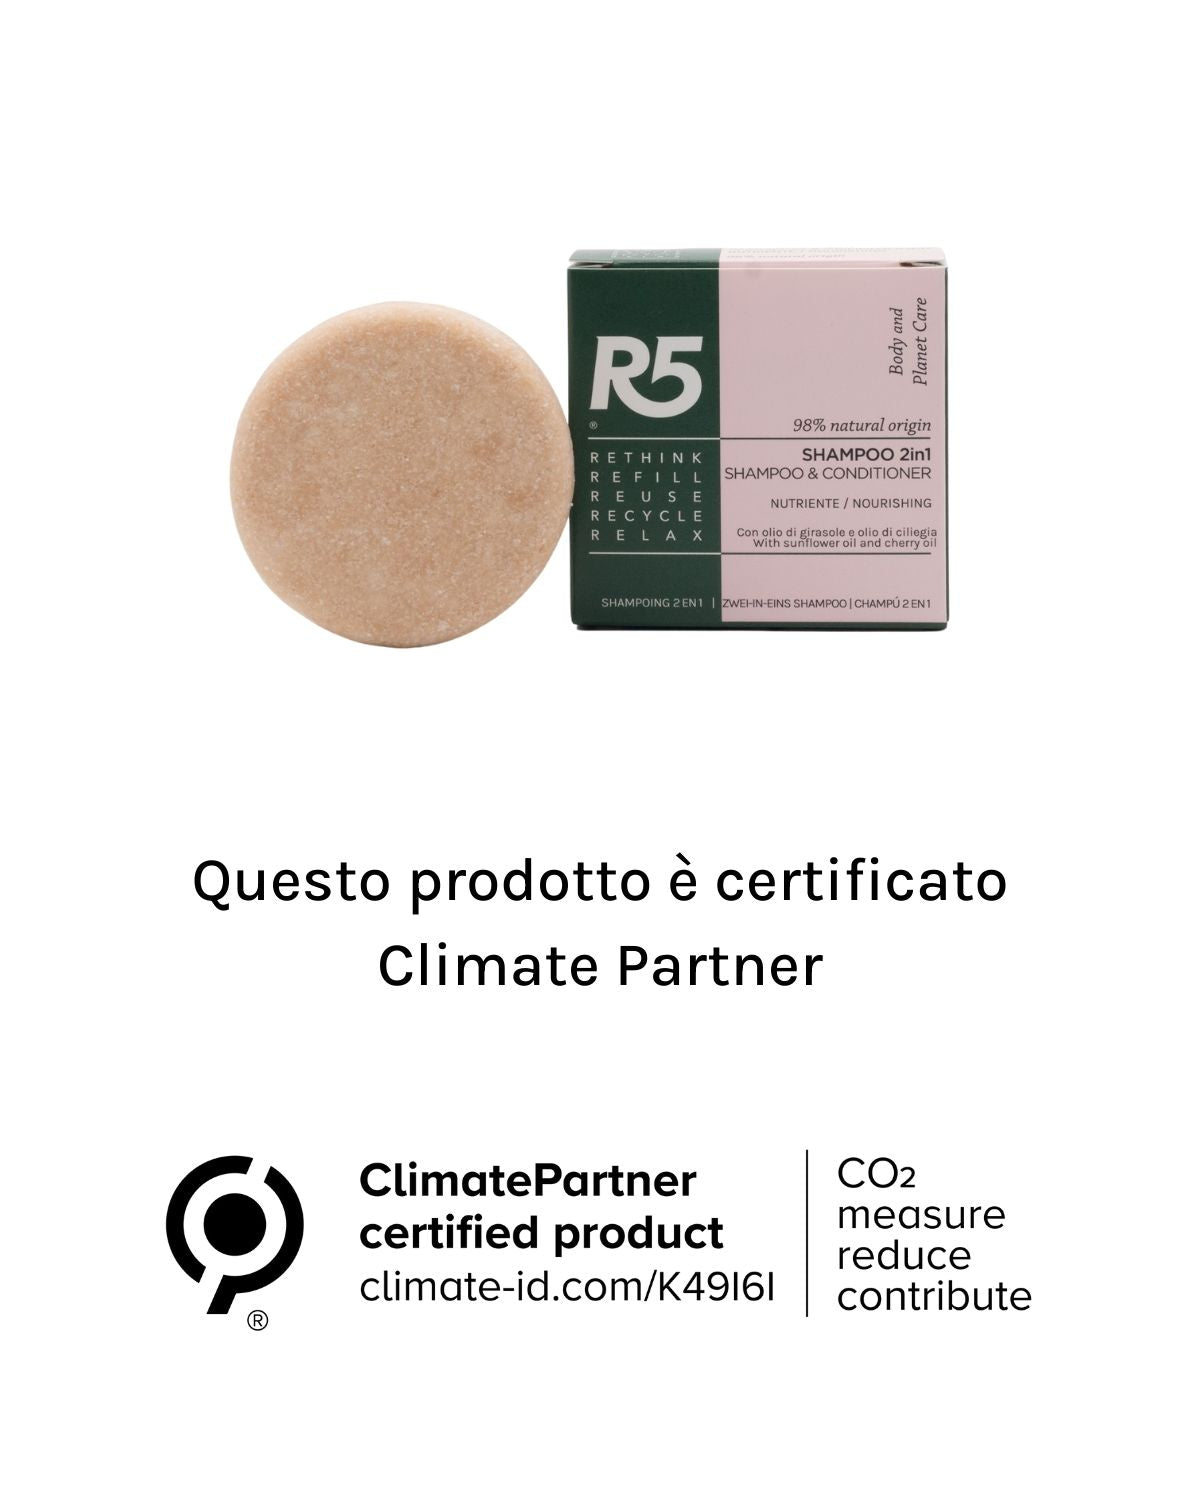 Climate Partner certified shampoo 2 in 1